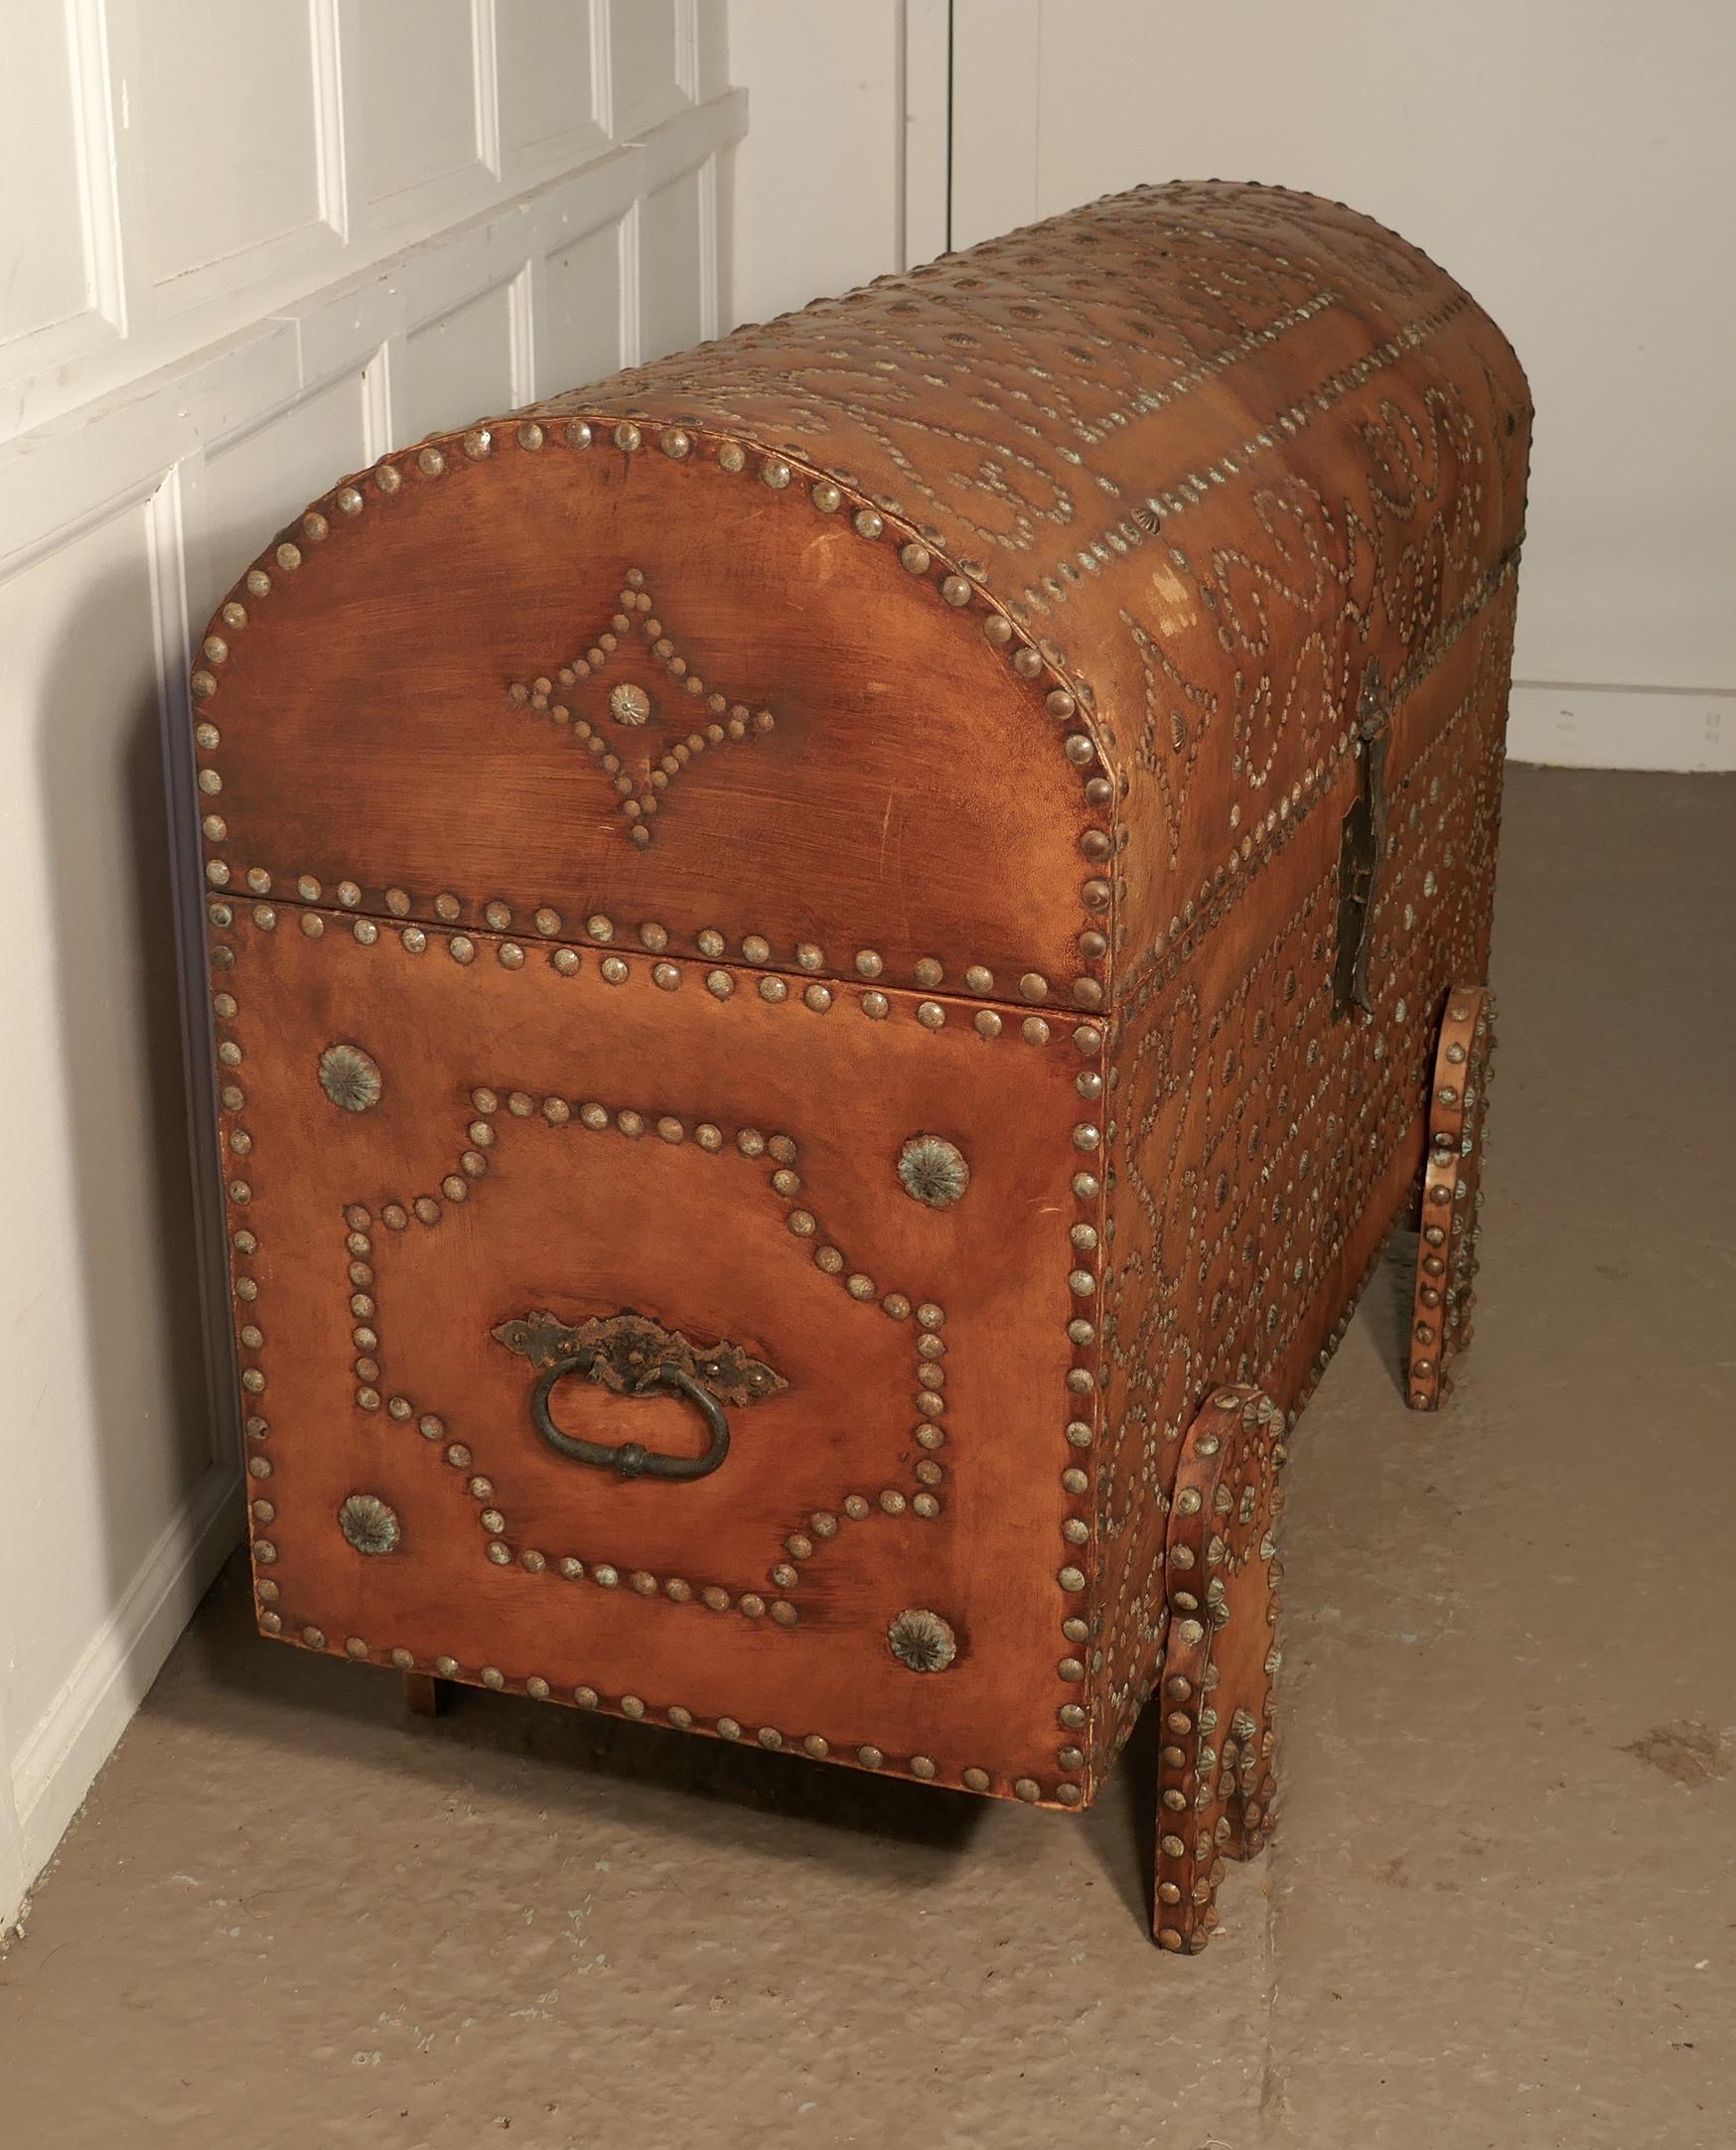 Spanish Dome Top Leather Brass Studded Marriage Chest or Travel Trunk 3